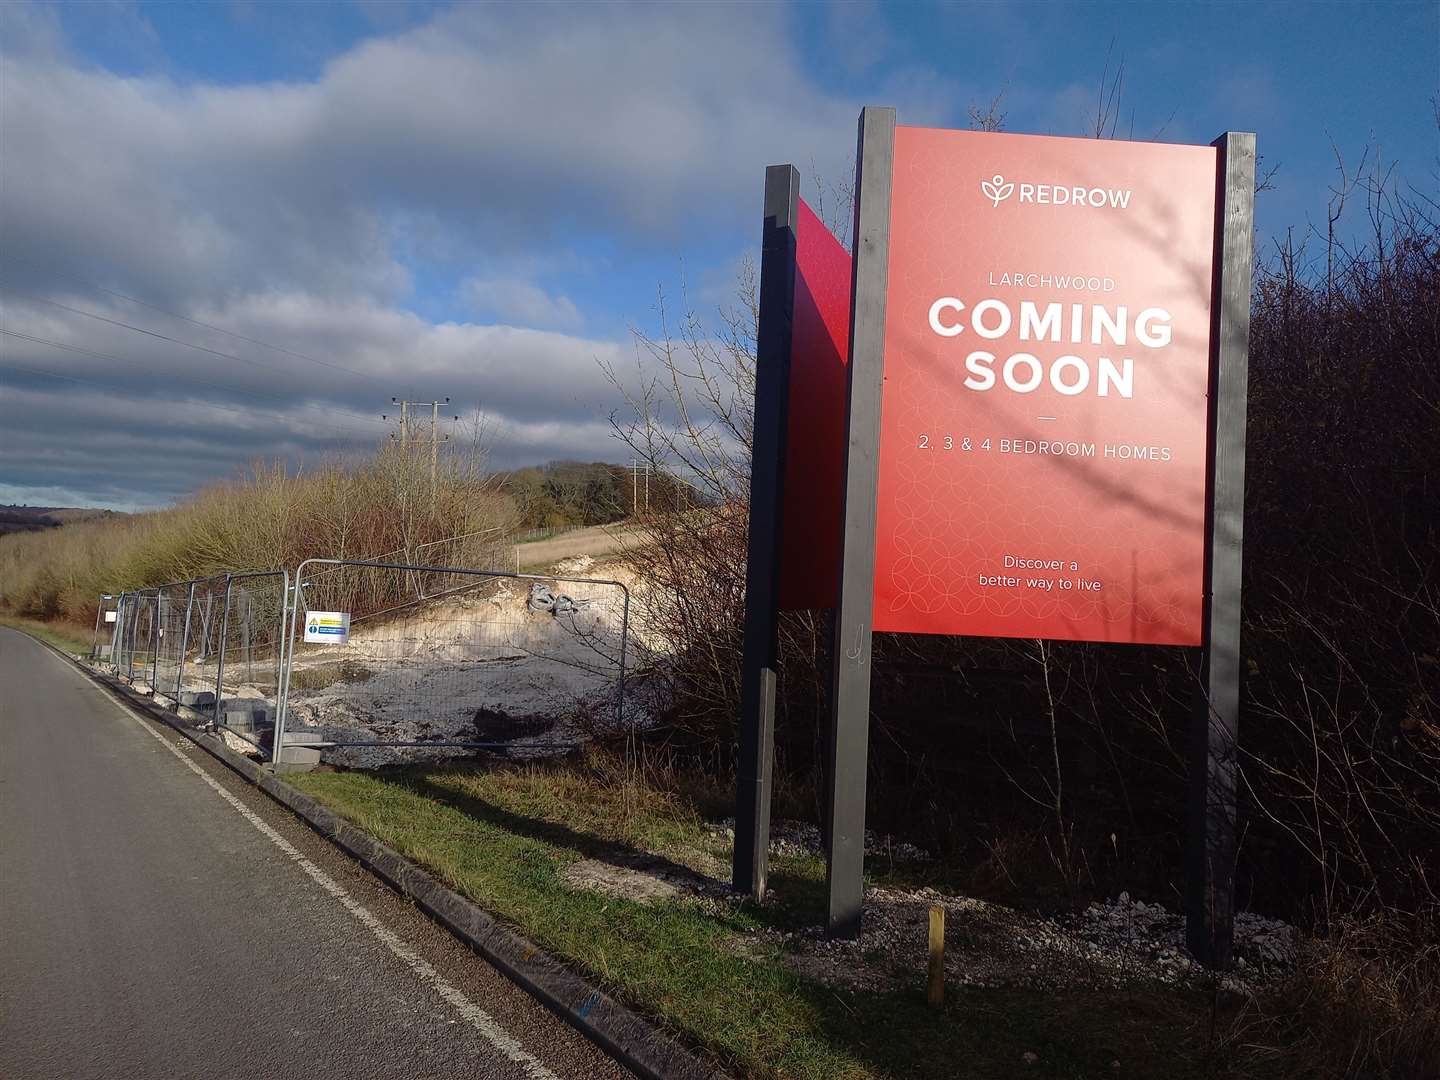 Redrow has restarted its work at Cockering Farm